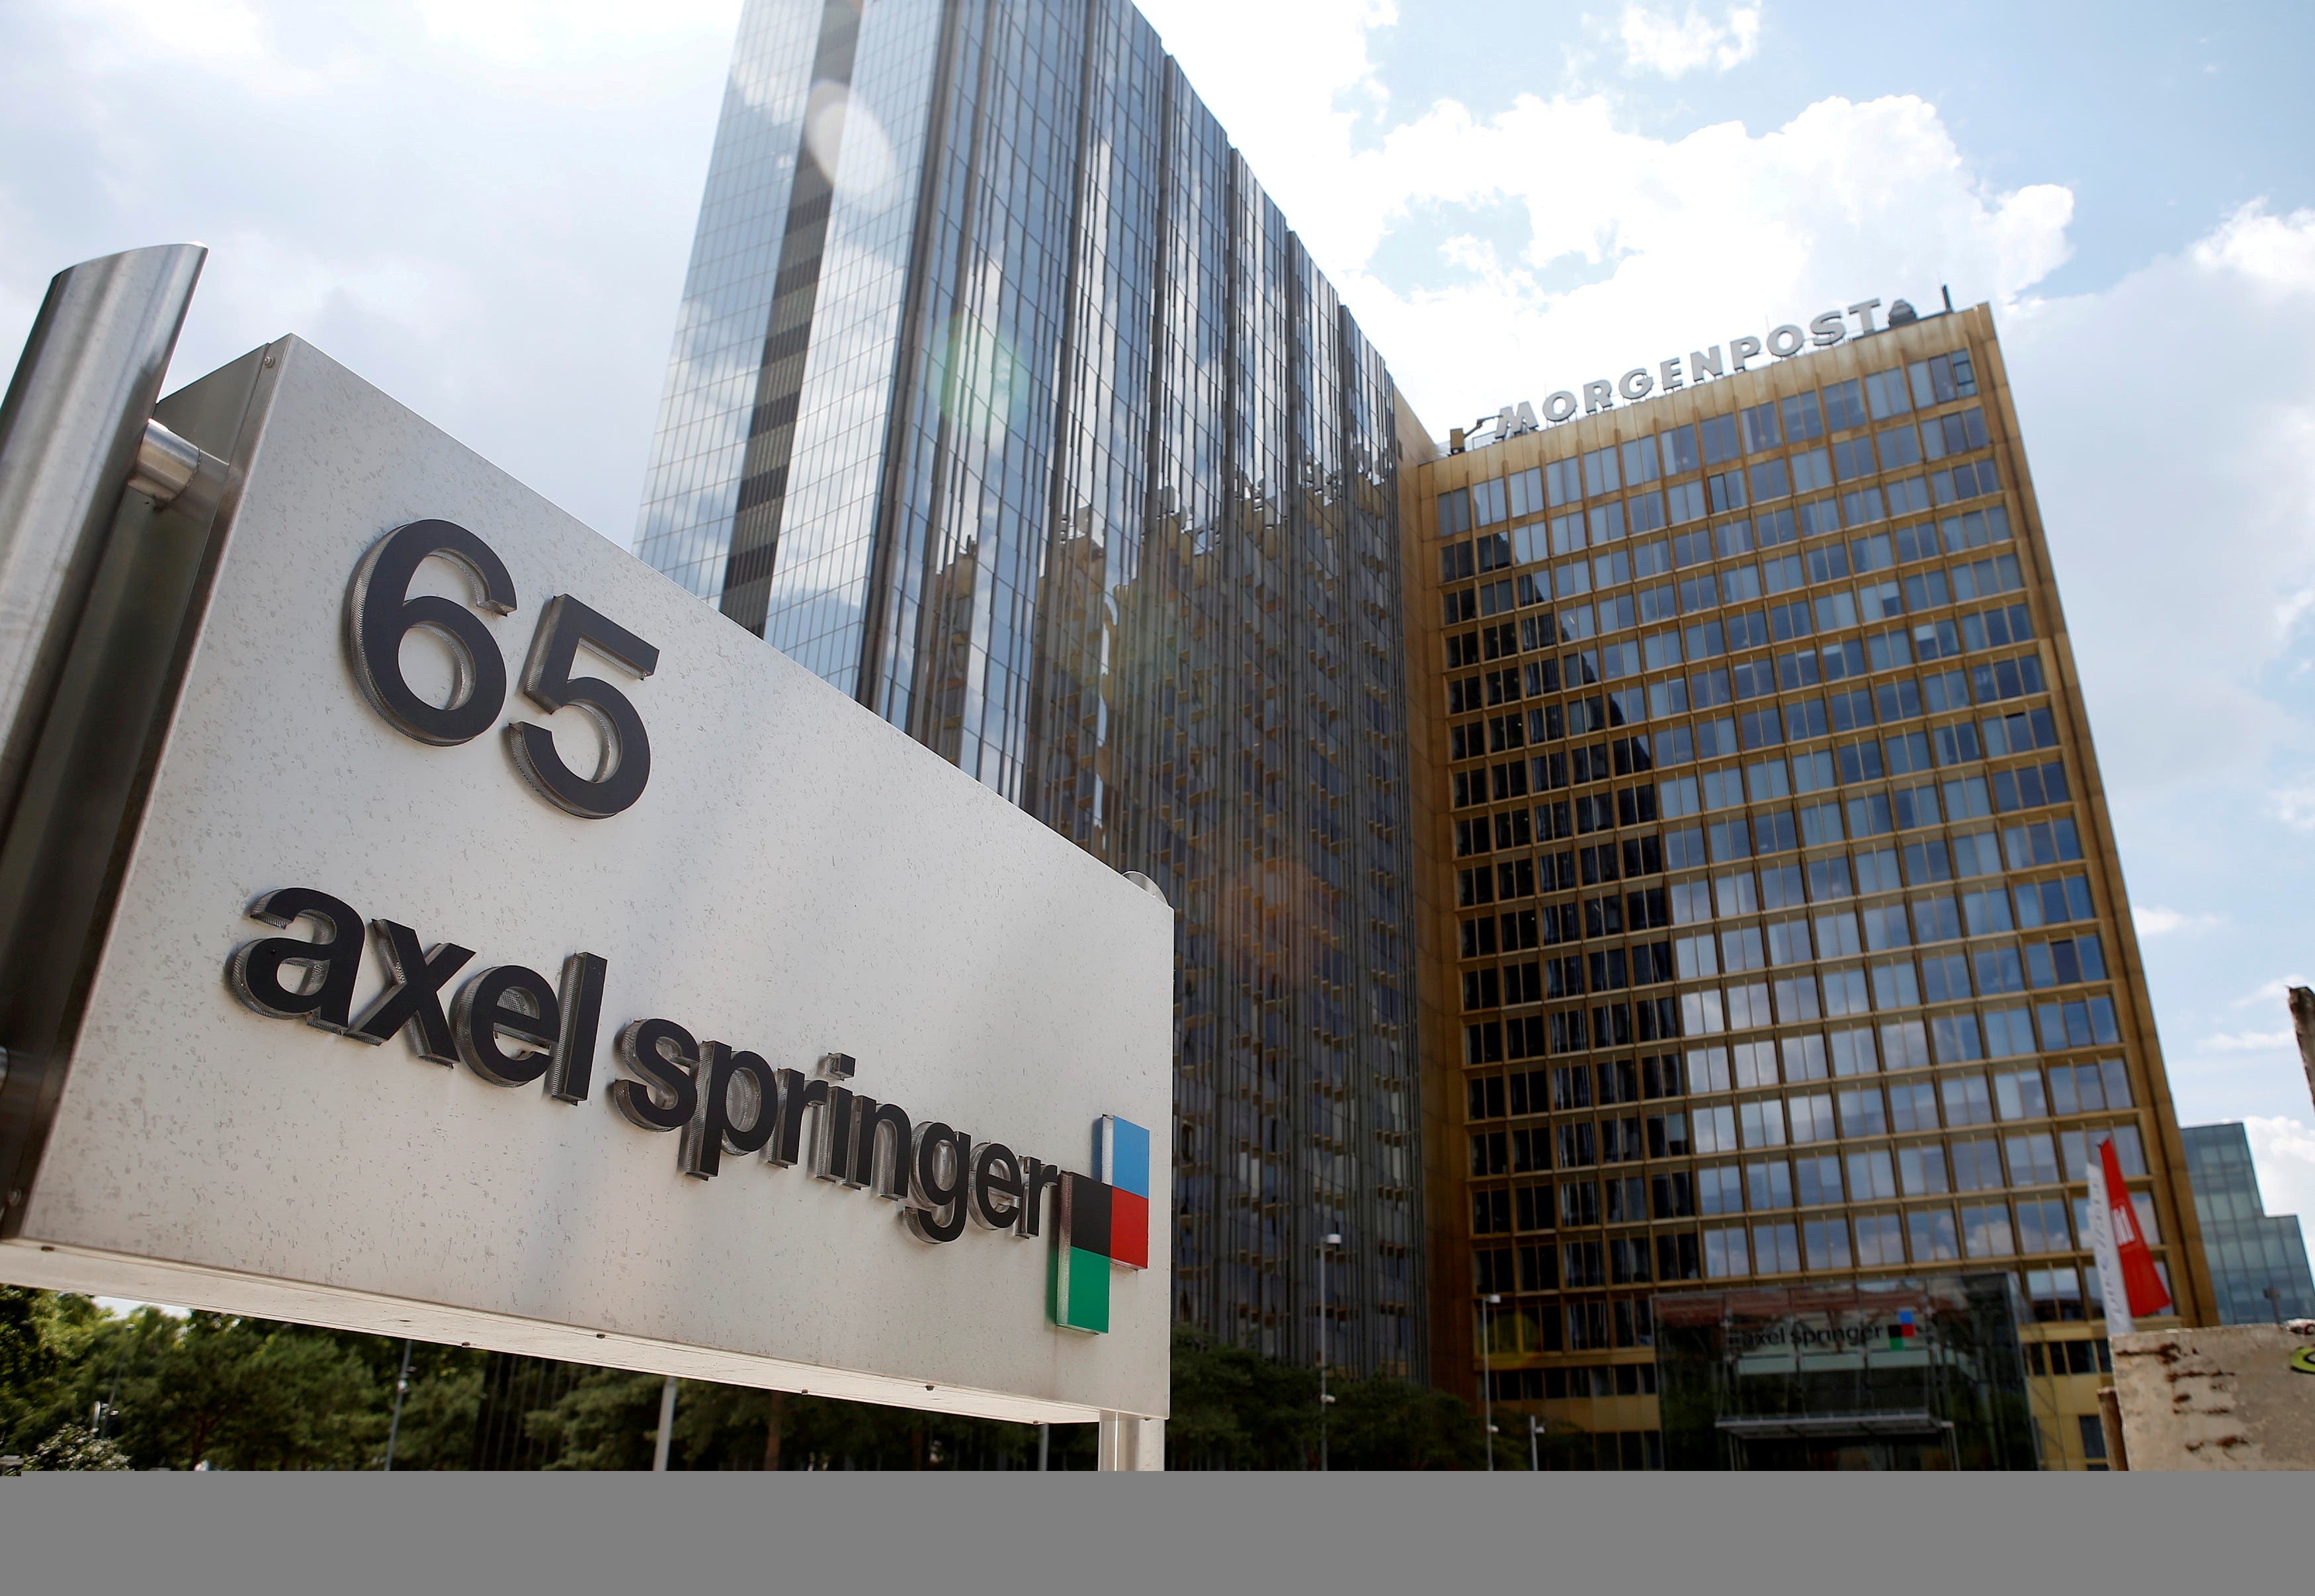 The Axel Springer Verlag is planning stricter rules for all employees